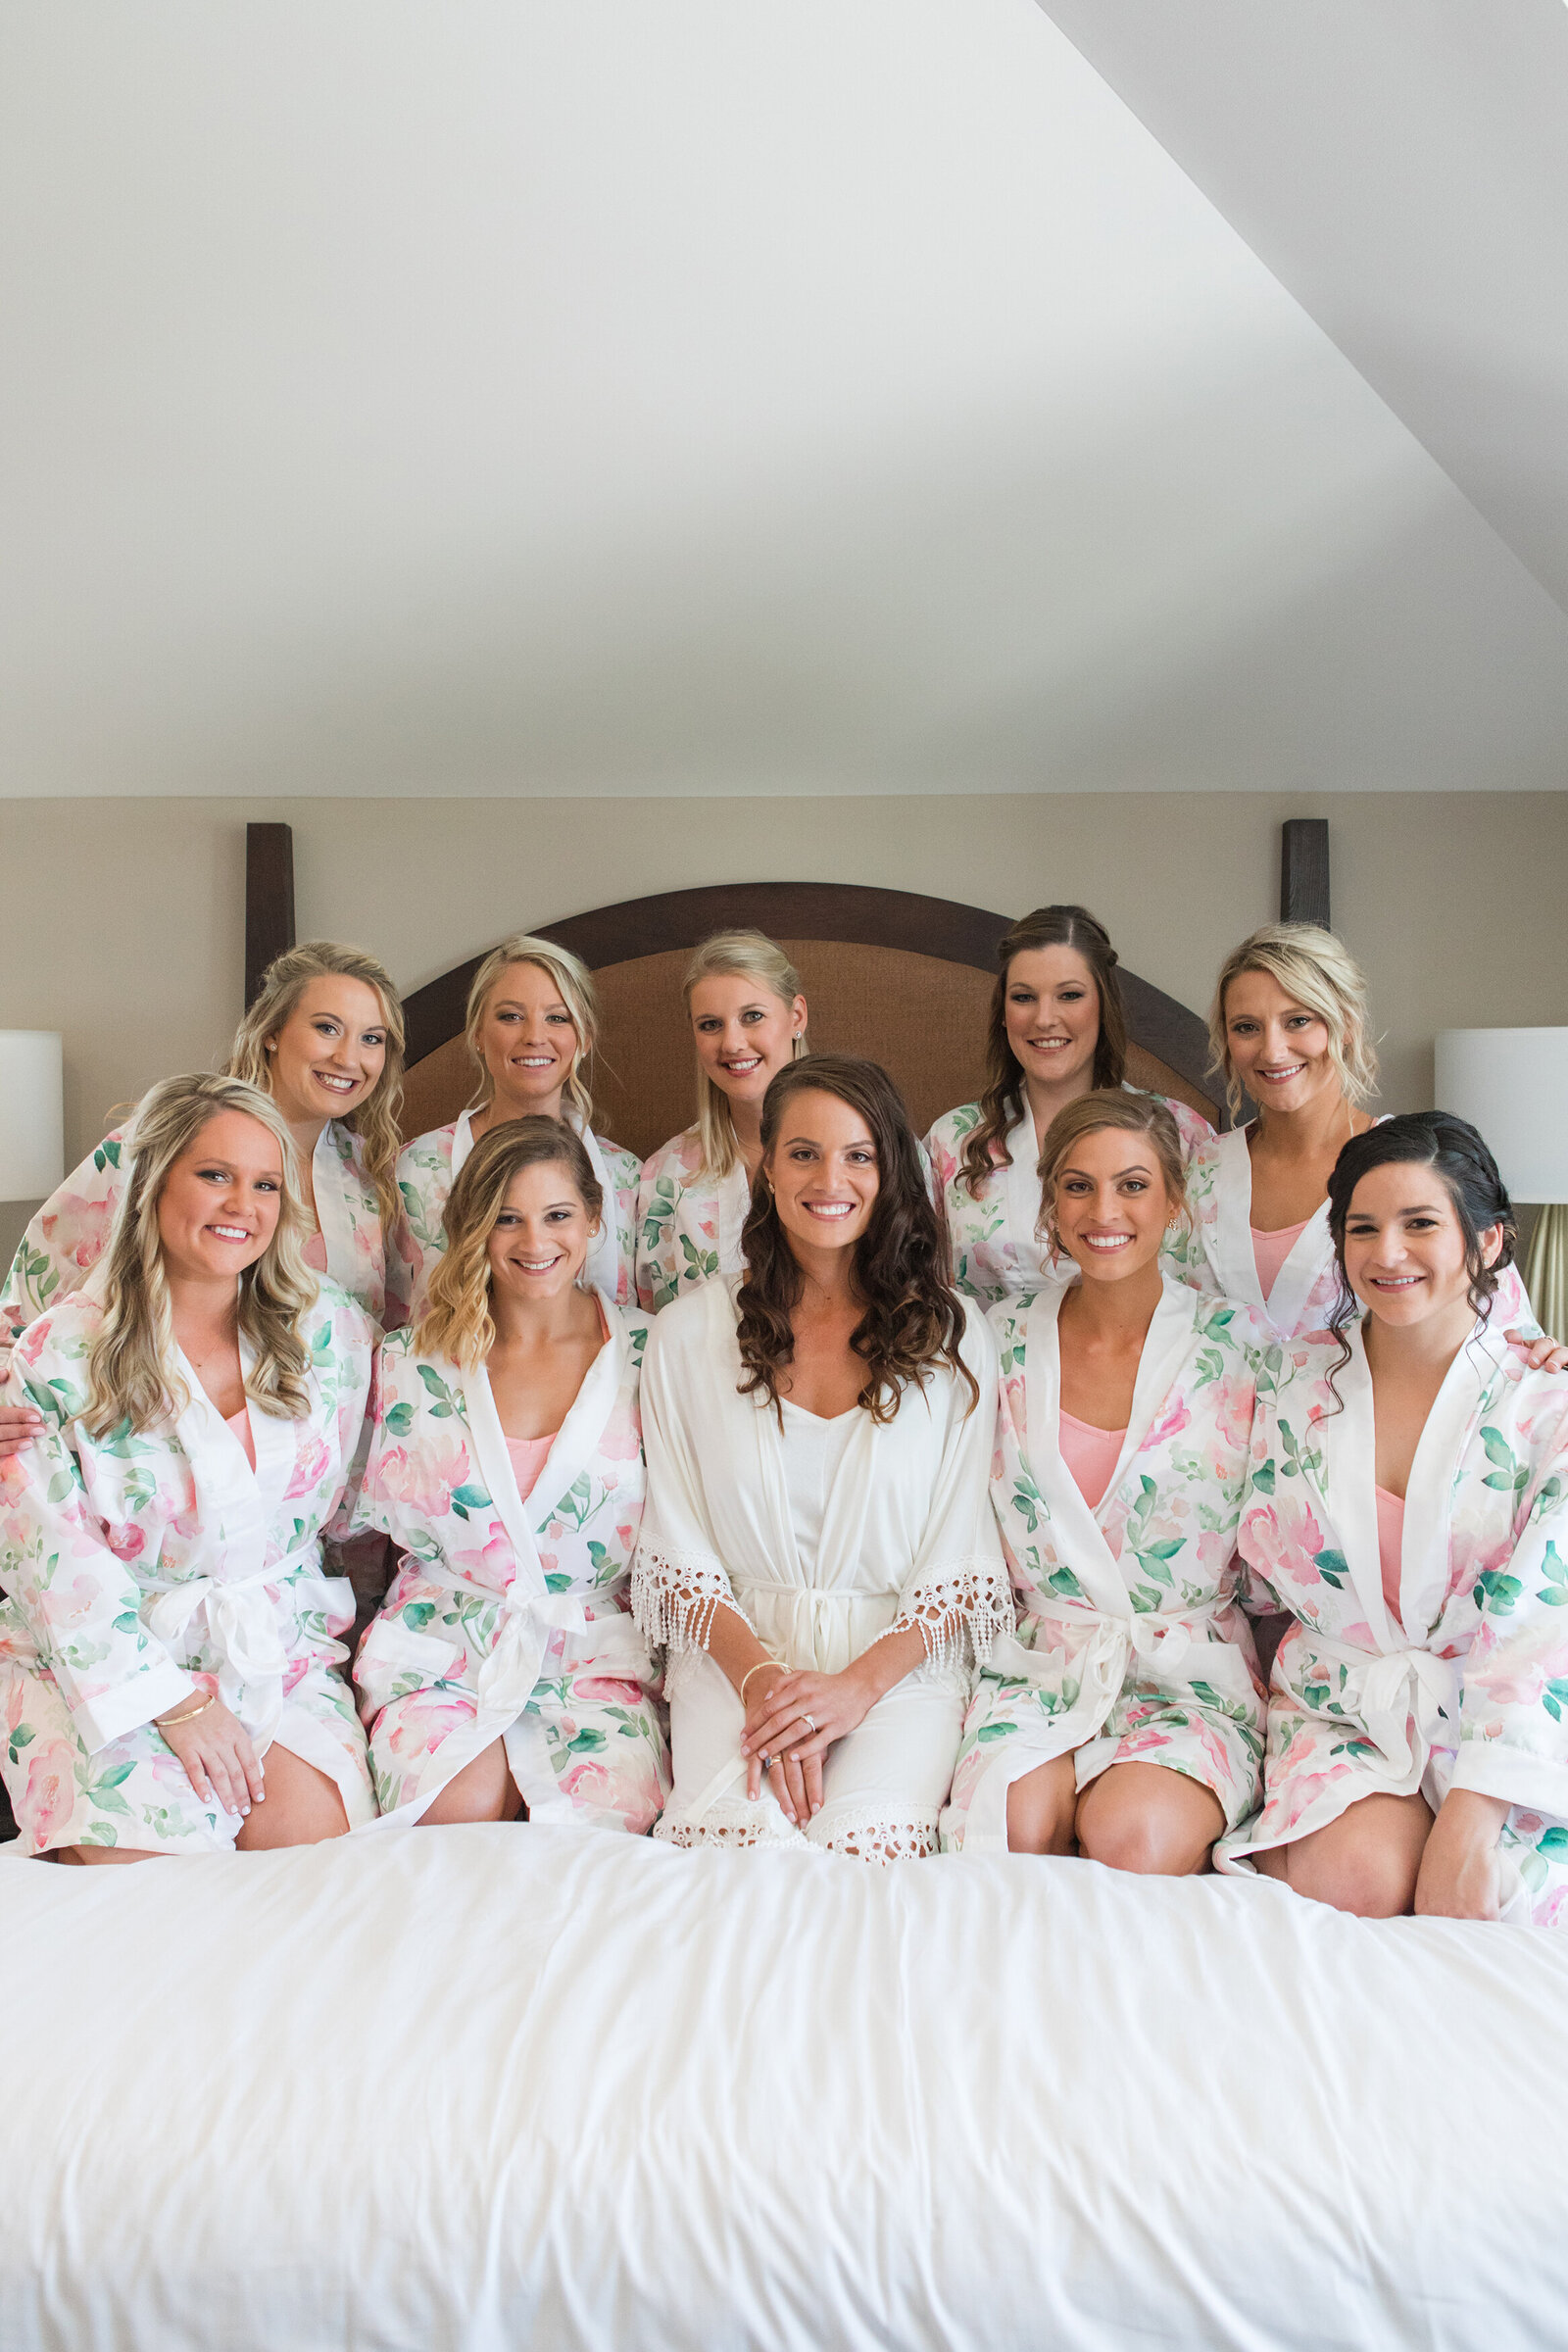 The Inn at Chesapeake Bay Beach Club bridal suite wedding photo of bridesmaids in robes by Annapolis Maryland photographer Christa Rae Photography